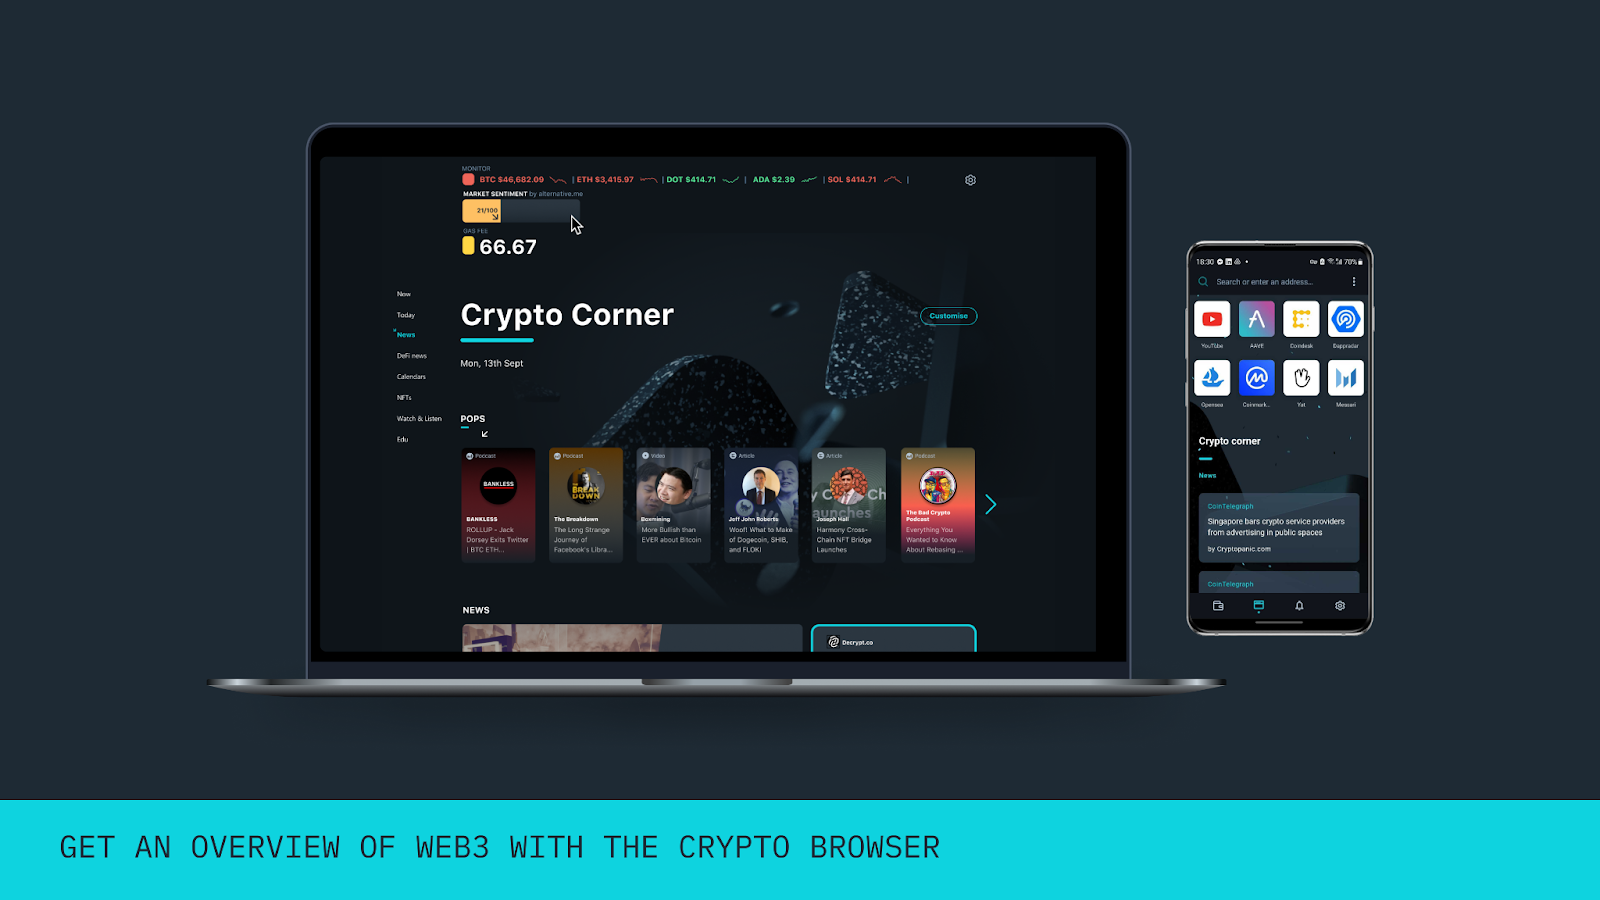 Opera Crypto Browser beta on desktop and mobile showing the Crypto Corner